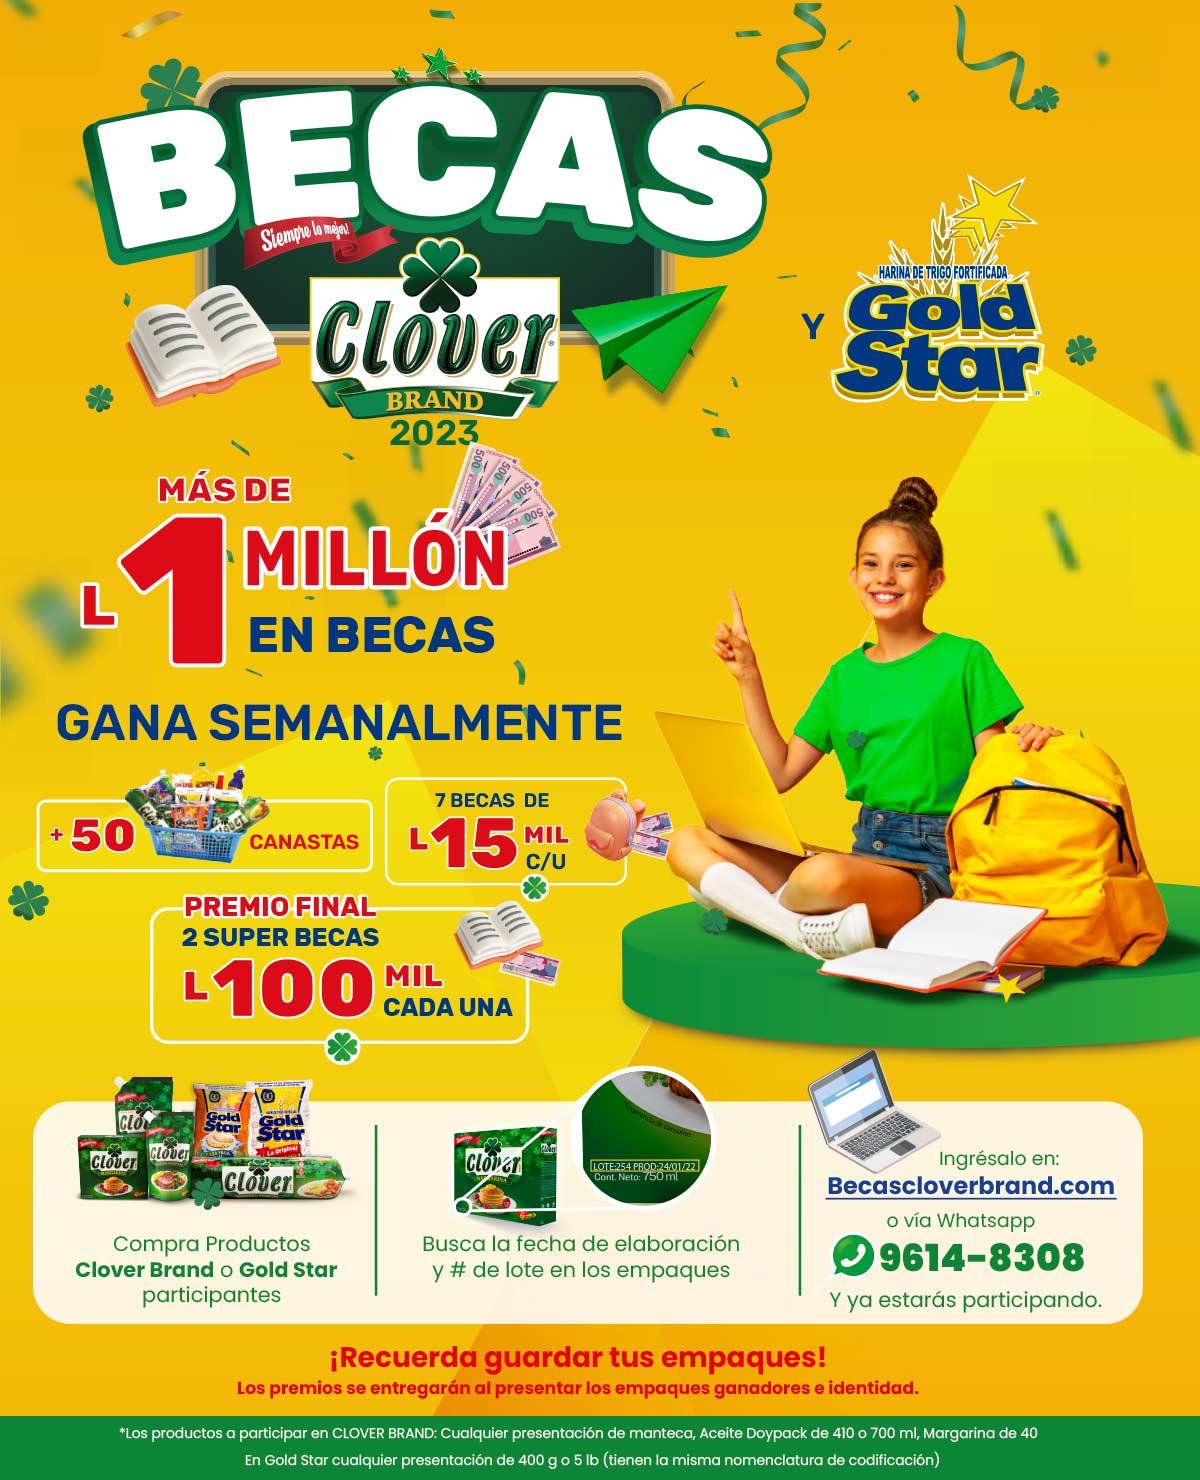 Becas Clover Brand lateral